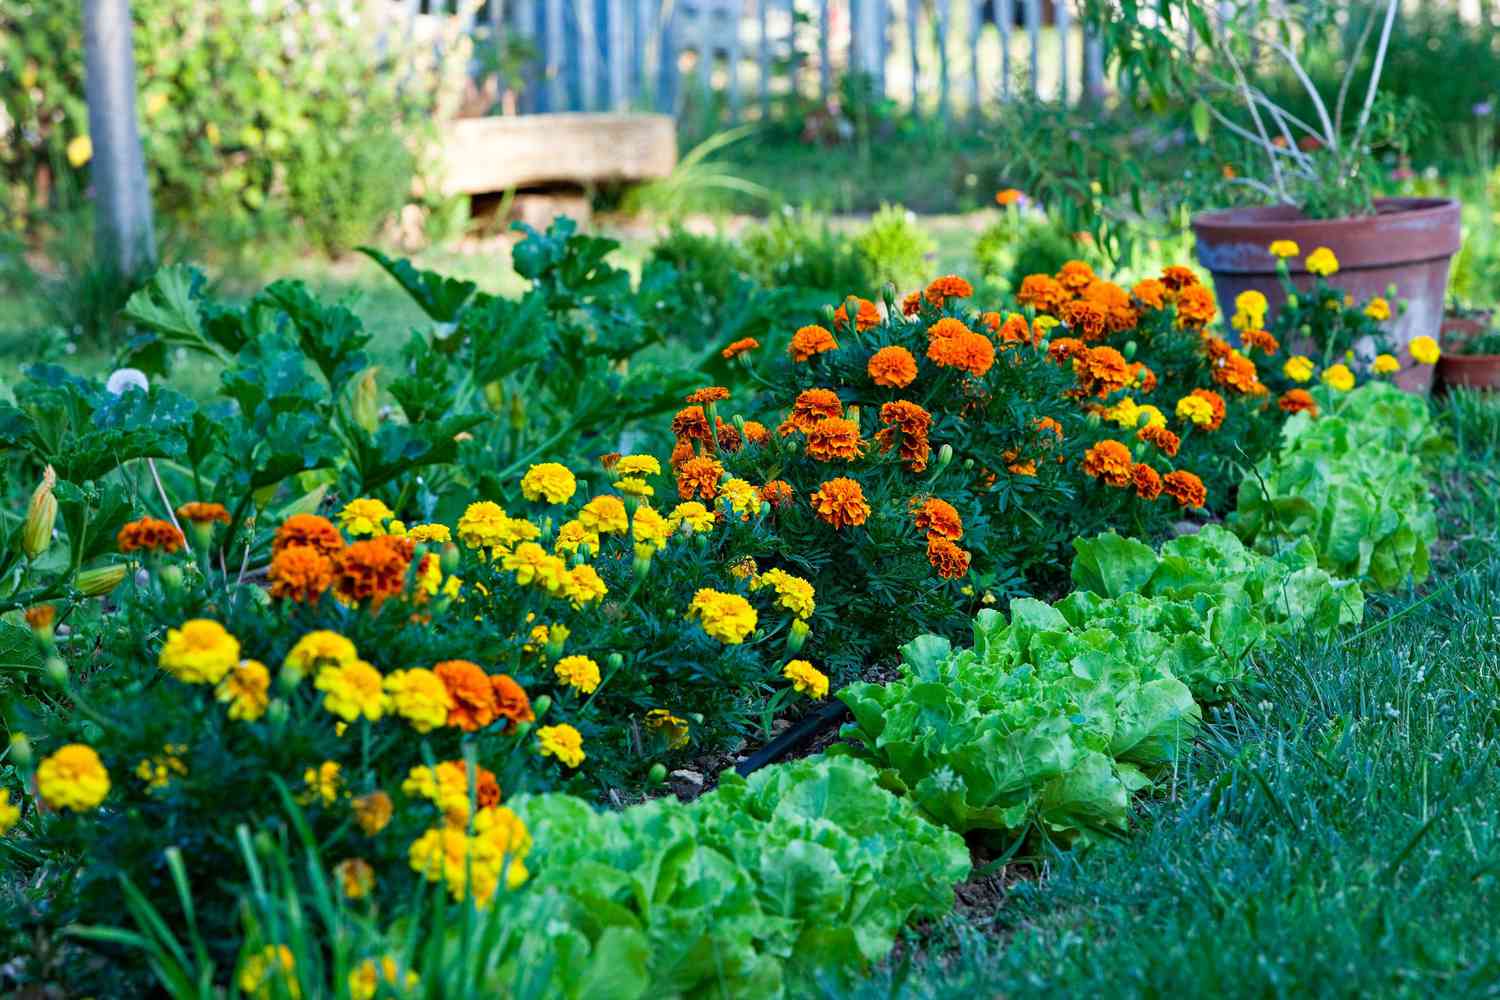 Where To Plant Marigolds In Vegetable Garden